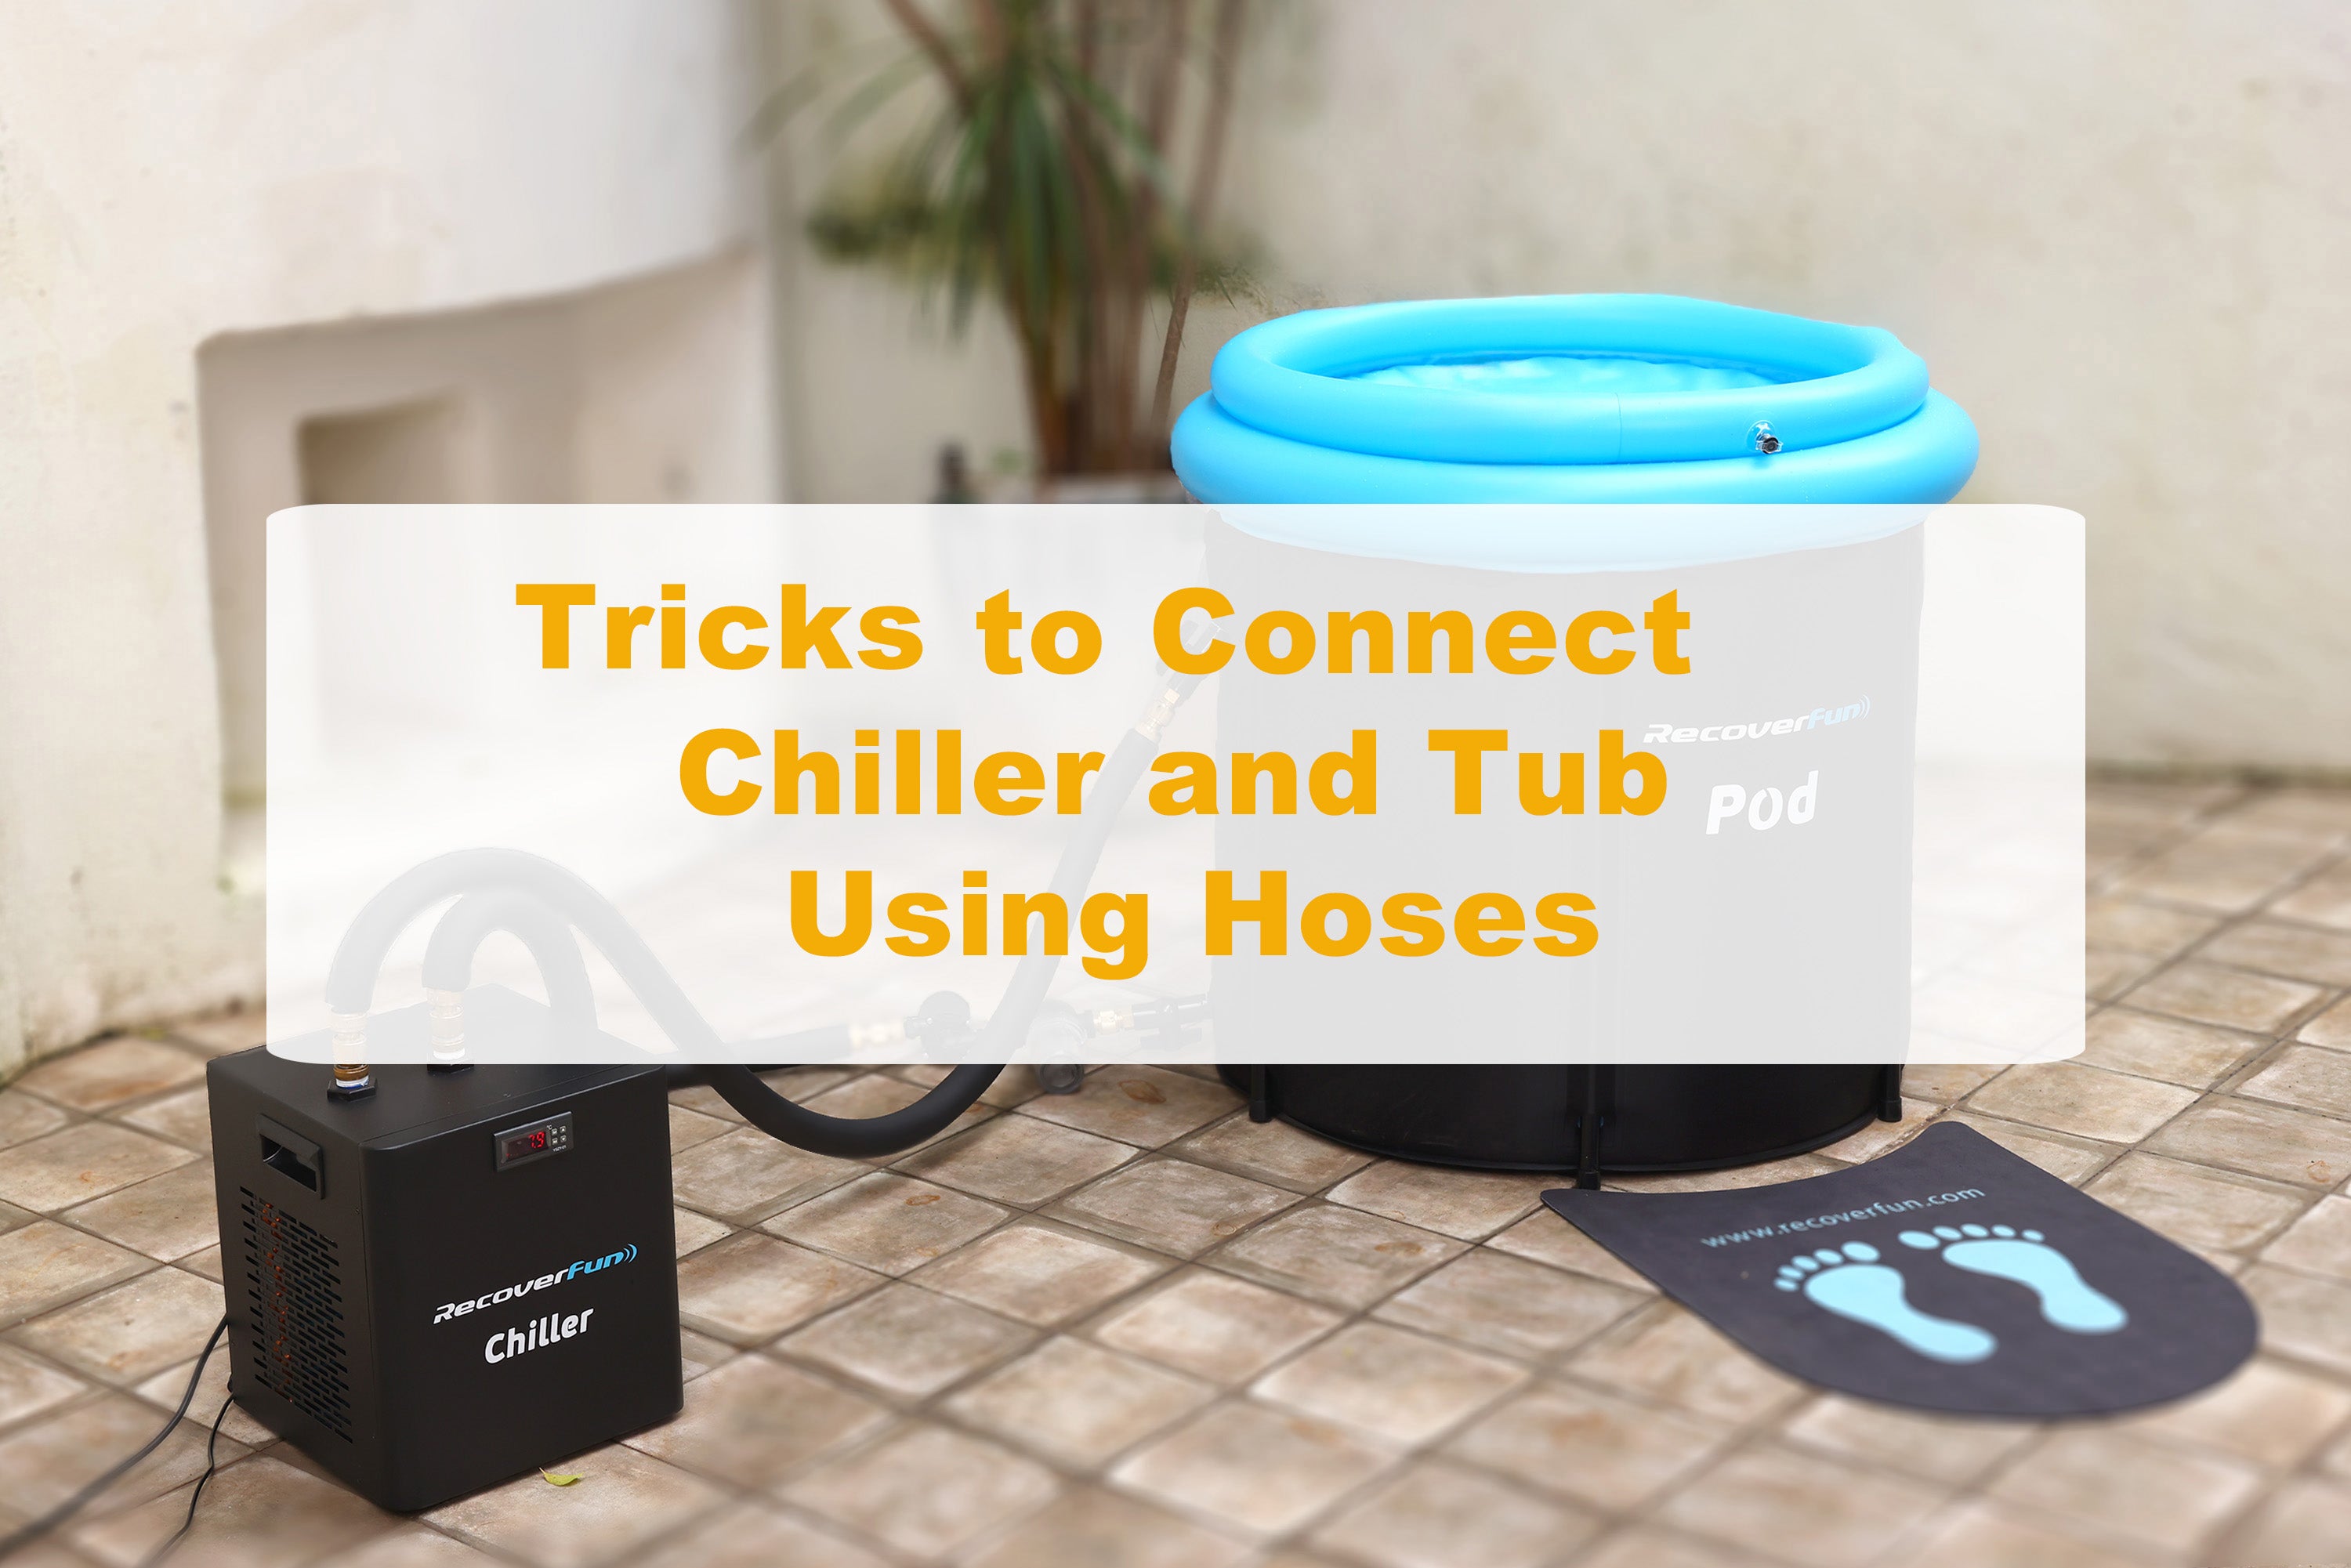 Load video: Tricks to Quickly Connect the Chiller and Tub Using Hoses